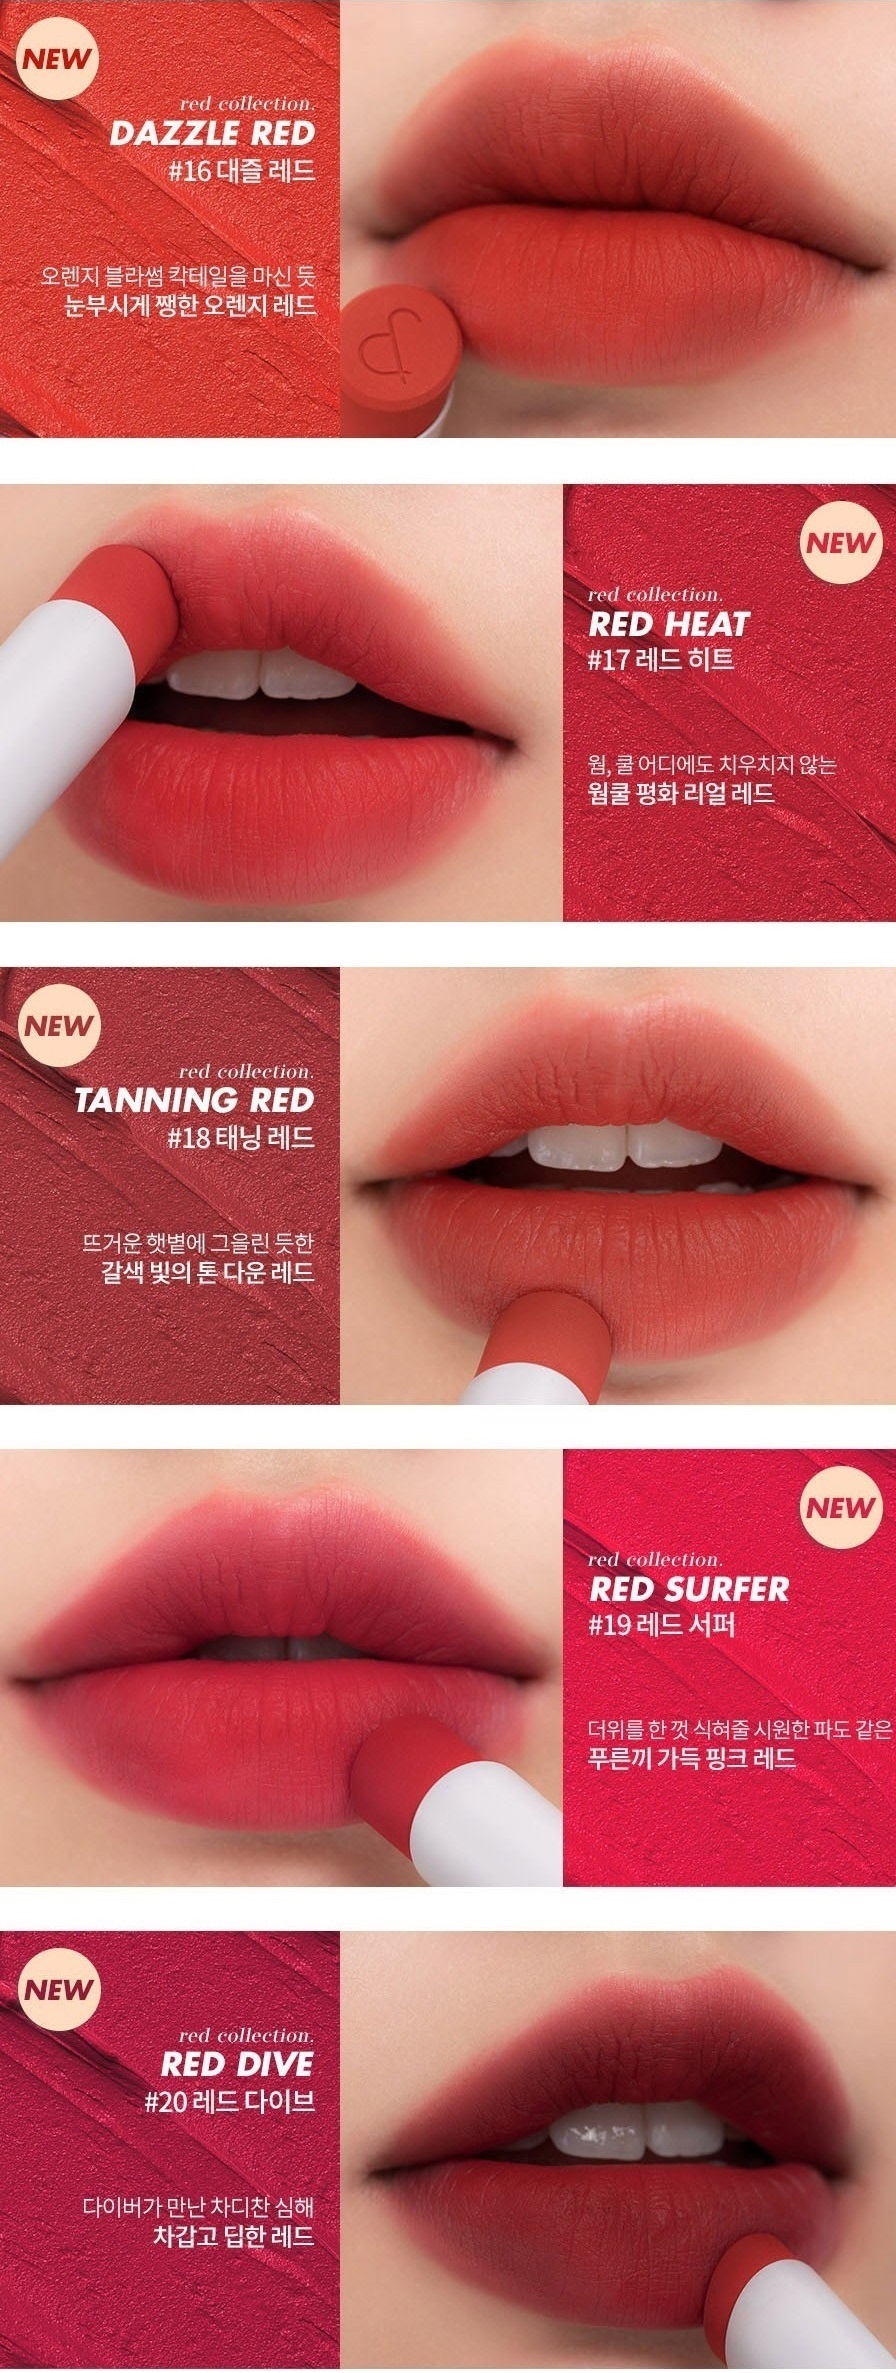 ROMAND Zero Matte Lipstick Dazzle Red Red Heat Tanning Red Red Surfer Red Dive